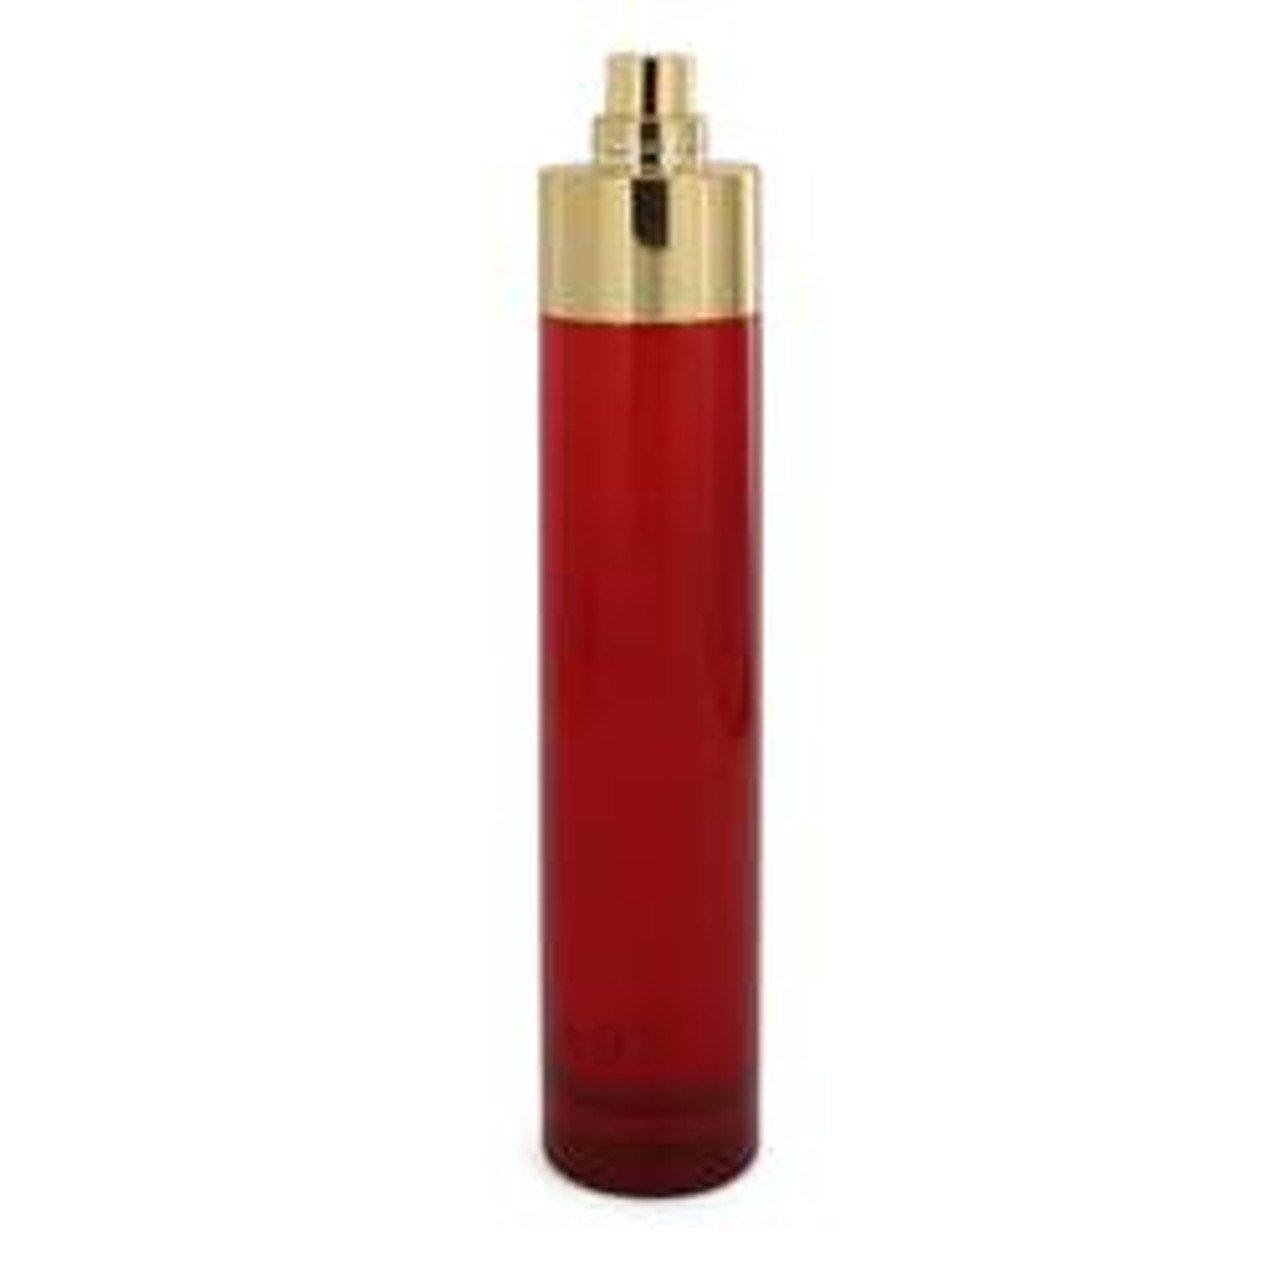 Perry Ellis 360 Red Perfume By Perry Ellis Eau De Parfum Spray (Tester) 3.4 oz for Women - [From 55.00 - Choose pk Qty ] - *Ships from Miami